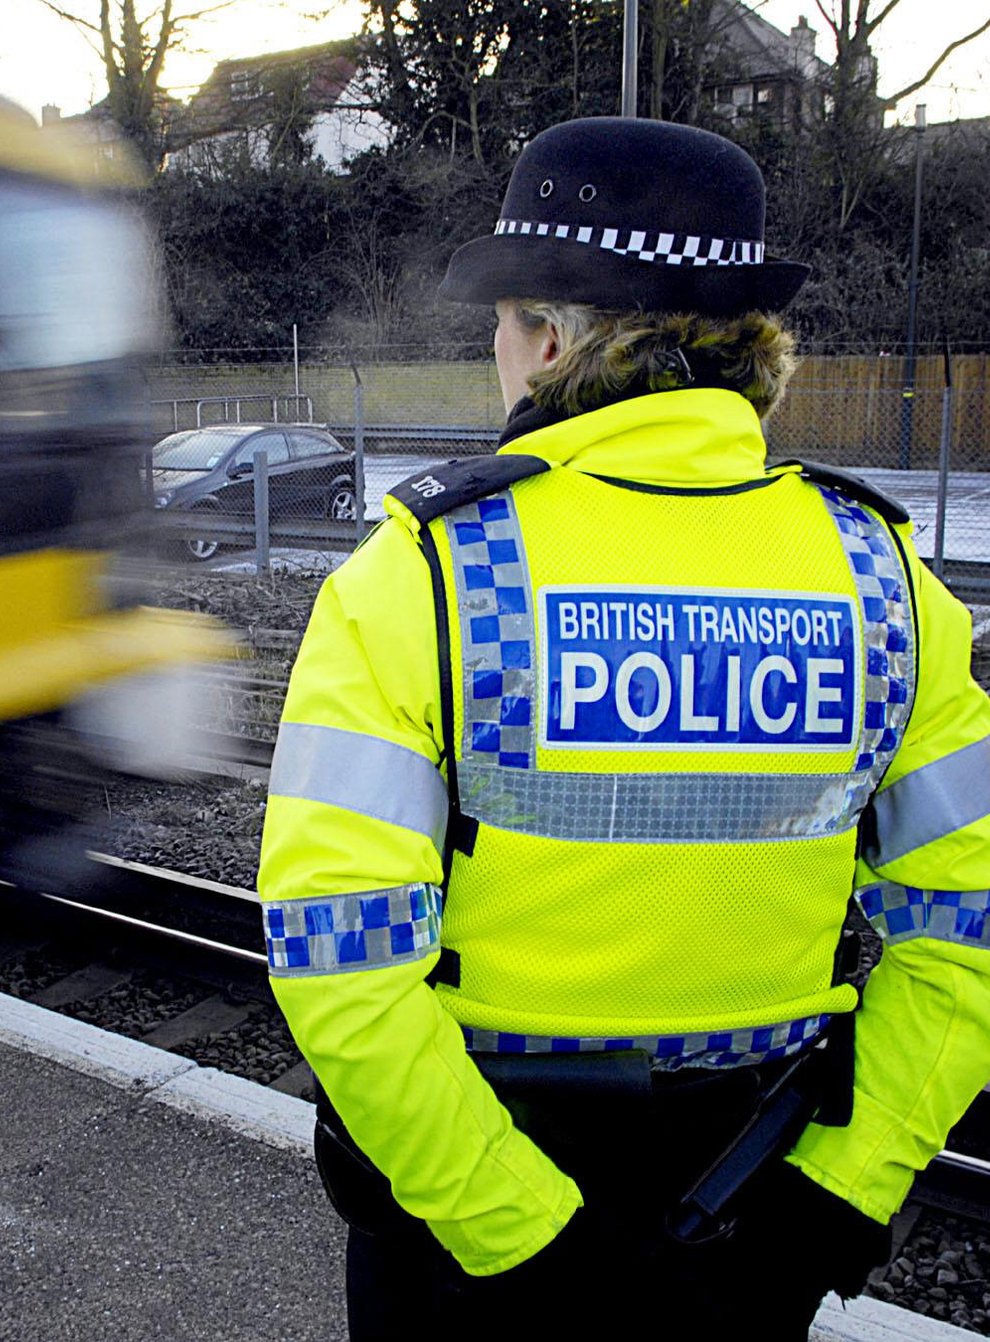 Mayor announces more police for London rail network